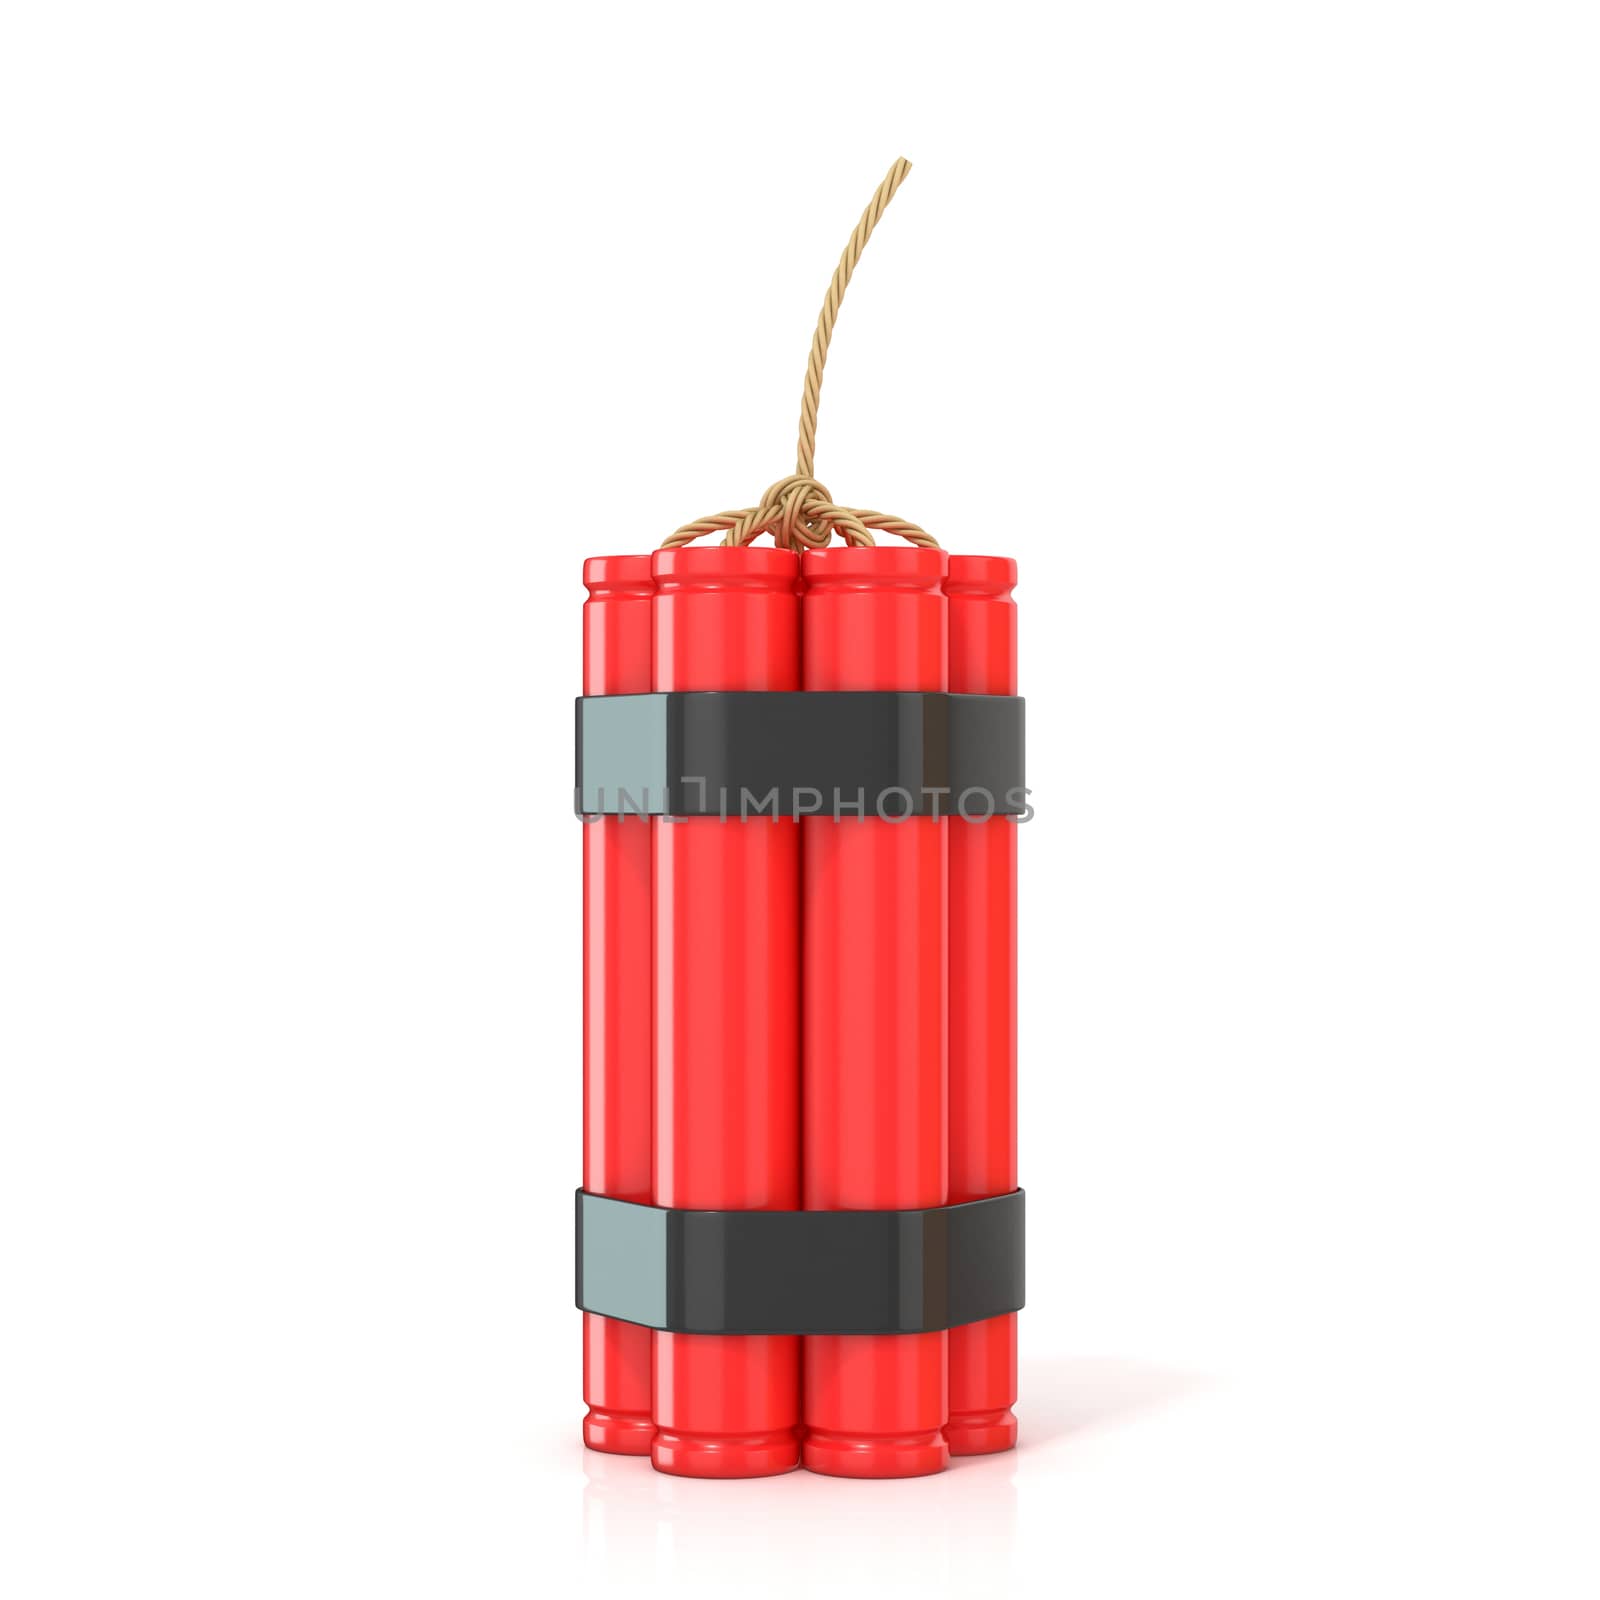 Red dynamite sticks - TNT with wick, standing. 3D render illustration isolated on white background